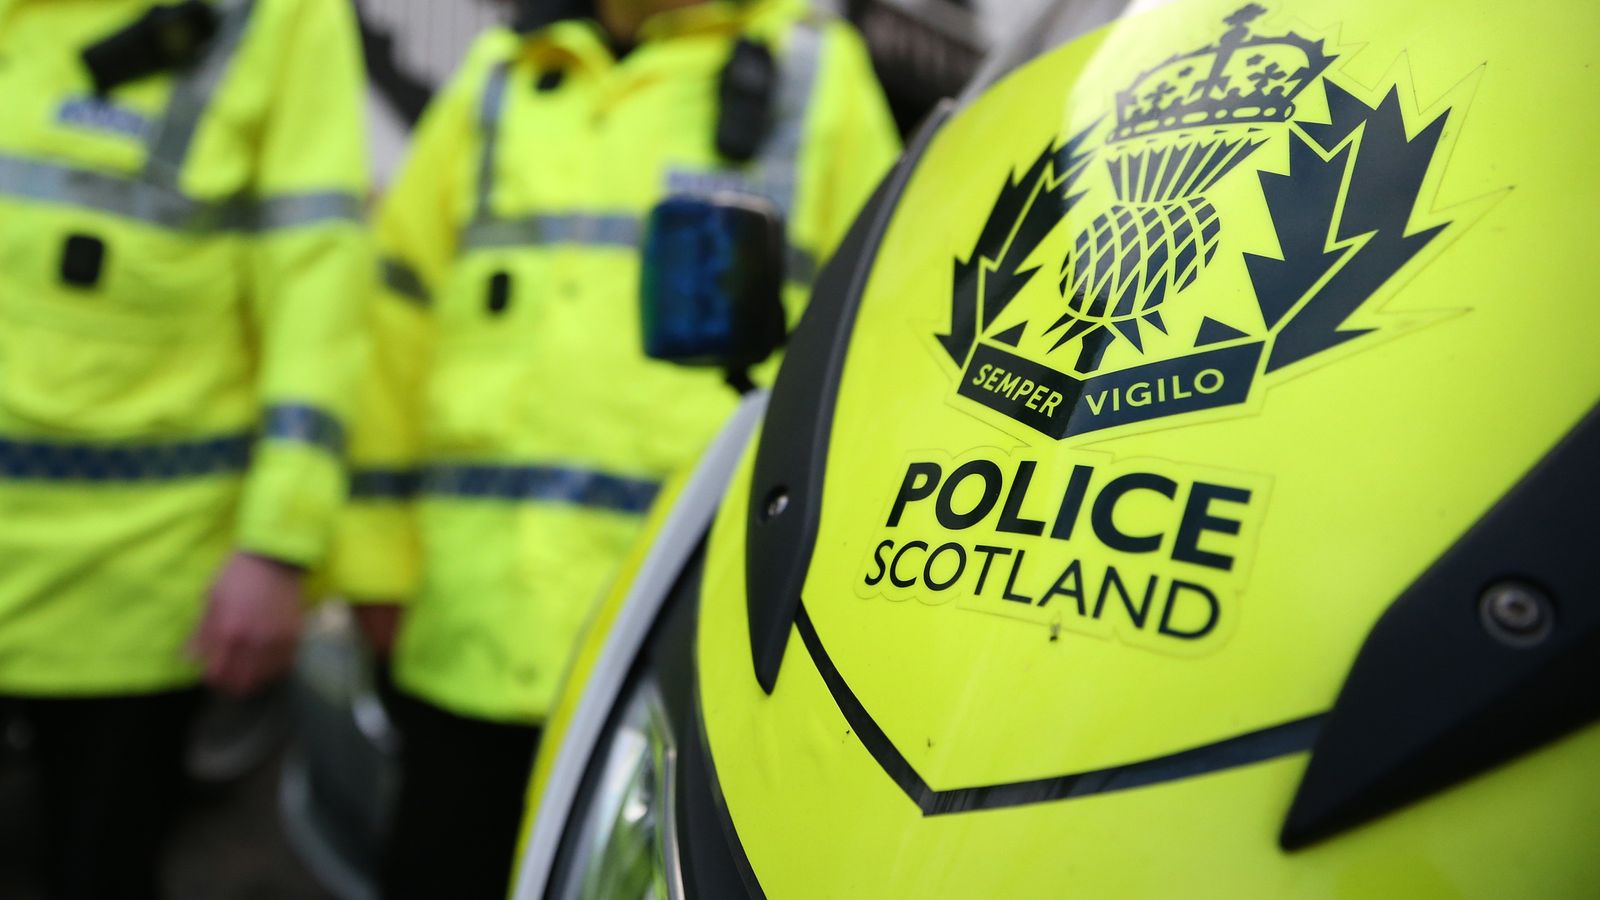 Pensioner arrested over 'serious sexual assault of 12-year-old girl' in Edinburgh